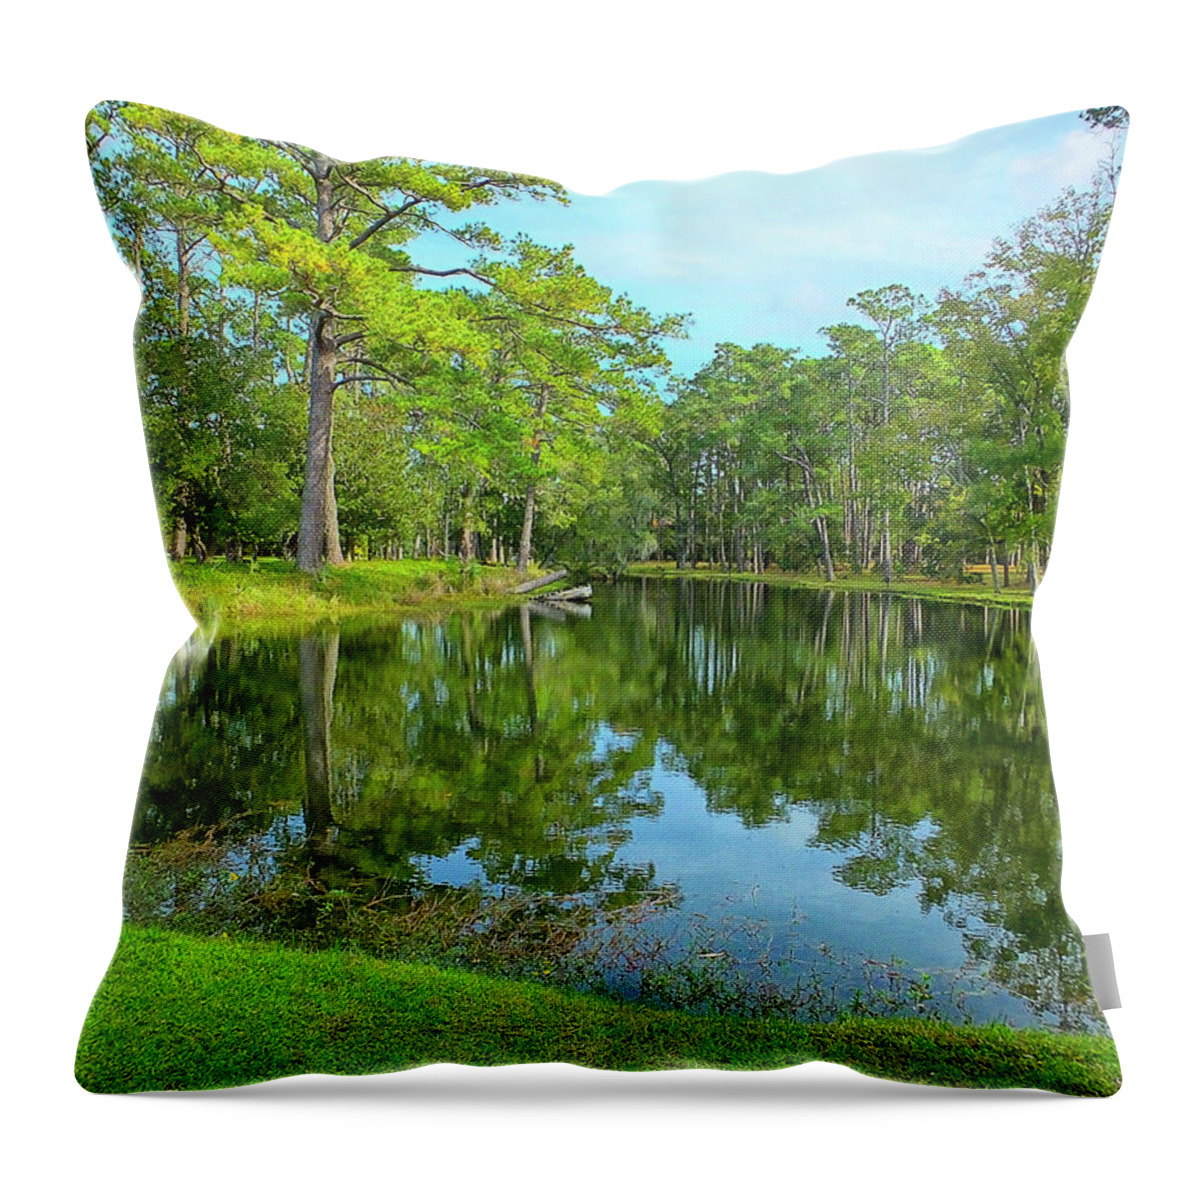 Water Throw Pillow featuring the photograph Jessamine Pond by Bill Barber